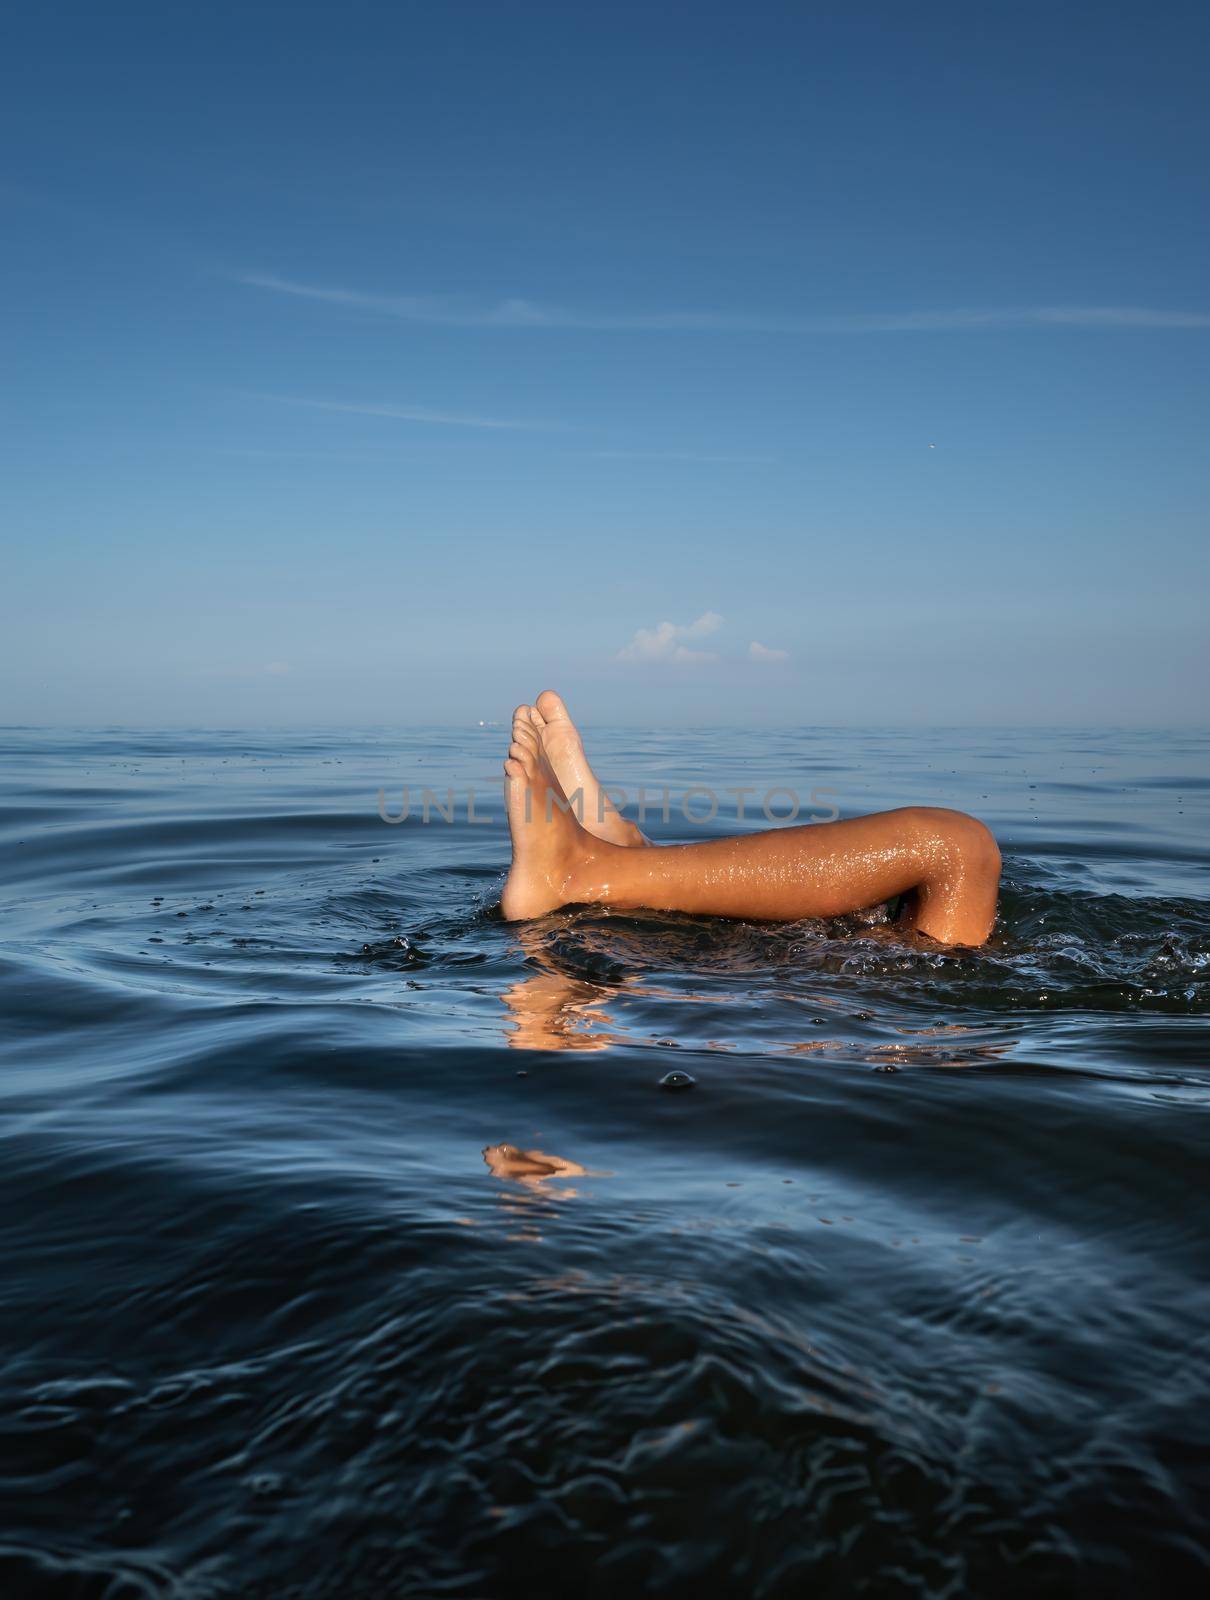 Relaxation and healthy lifestyle. Young boy teenager bathes in the sea. The boy dives and his legs stick out above the water